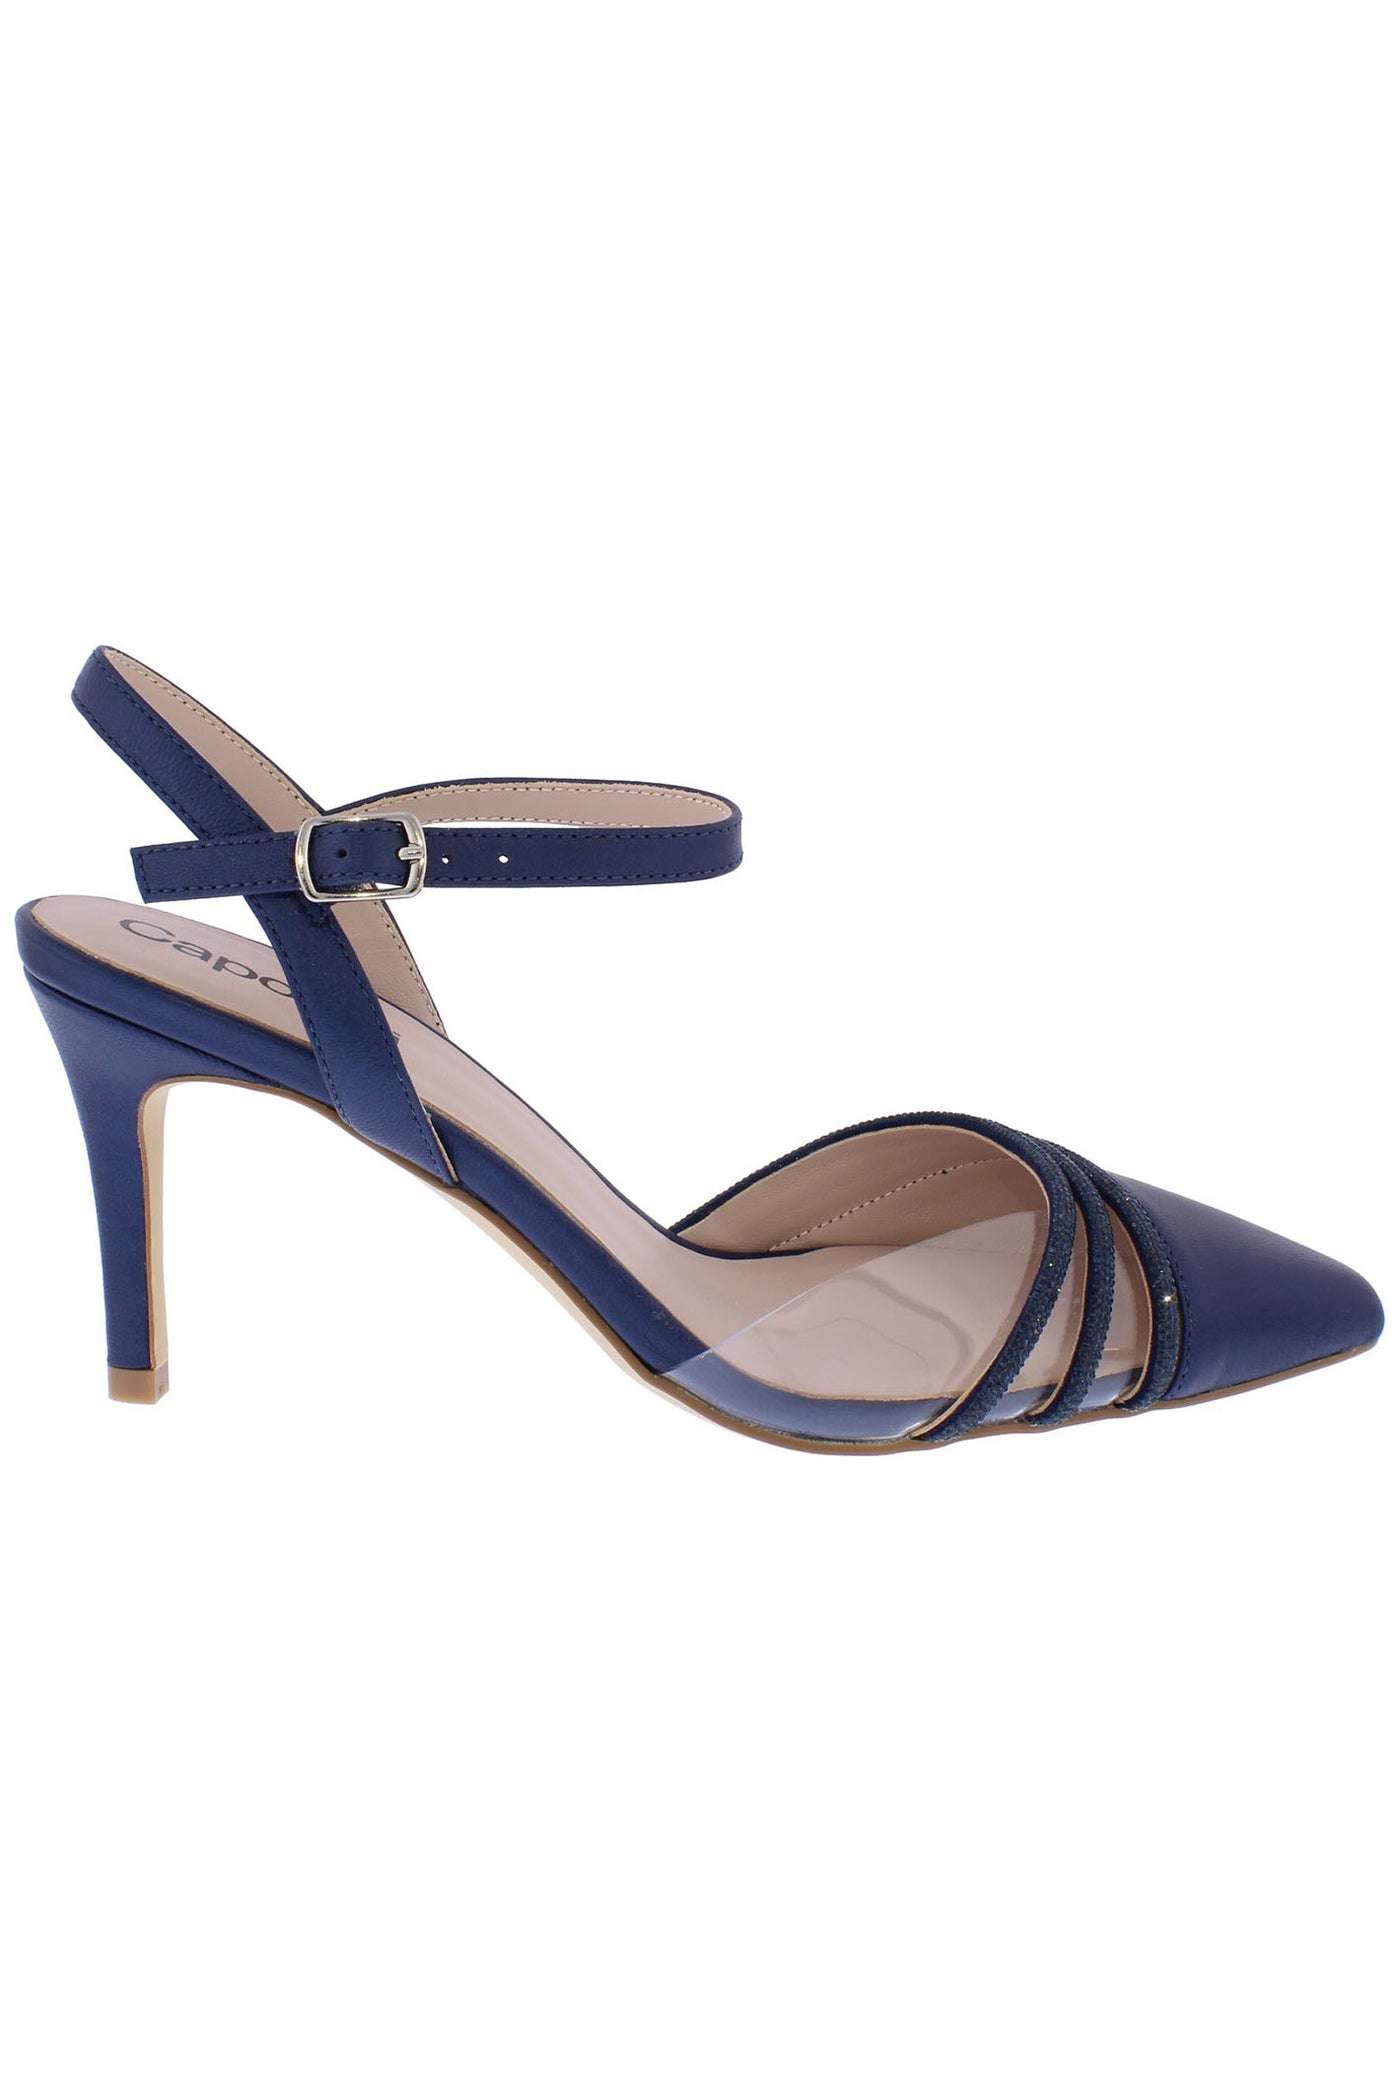 Capollini C231 Ophelia Navy Heeled Sling Back Occasion Shoe - Rouge Boutique Inverness